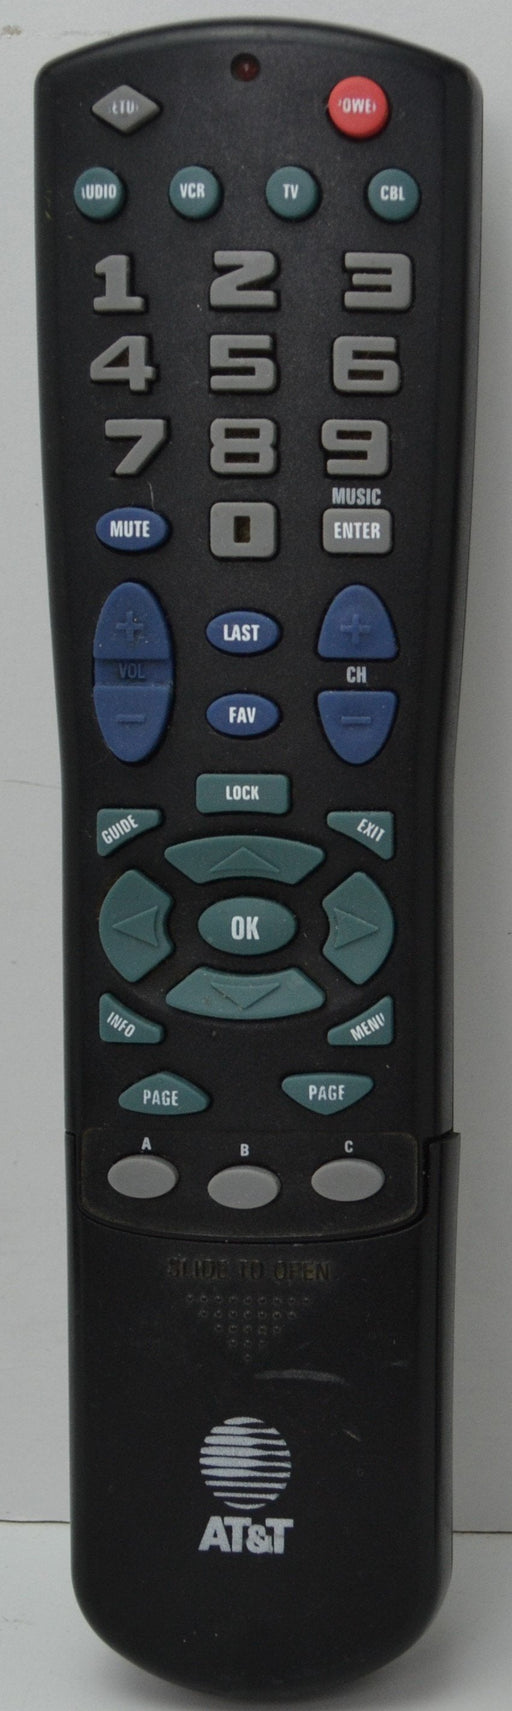 AT&T MKT476A-A00 Universal Remote Control-Remote-SpenCertified-refurbished-vintage-electonics